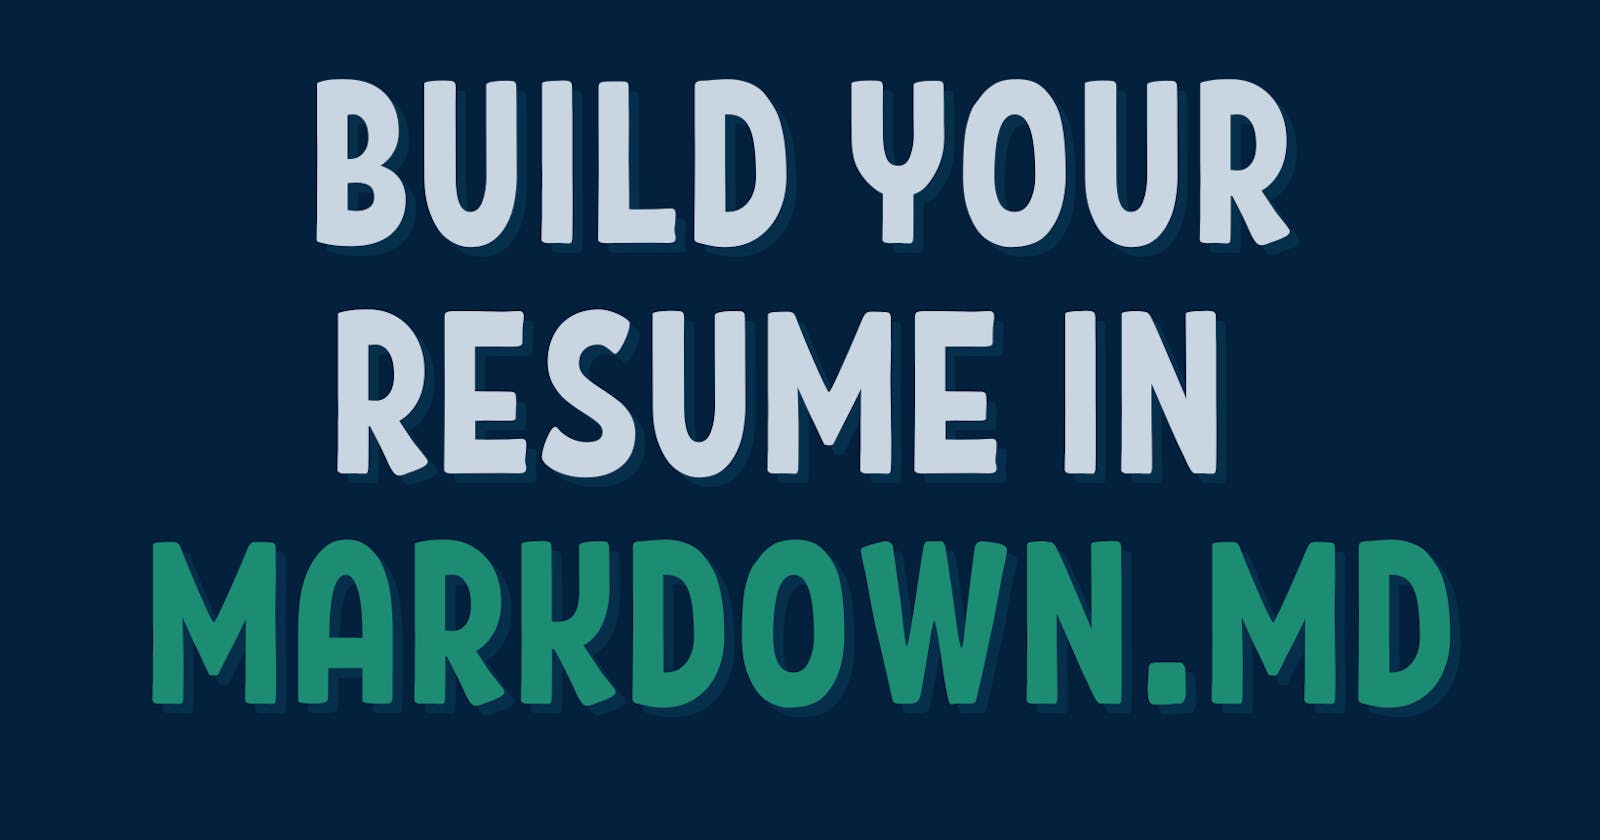 Build your resume in markdown 📄